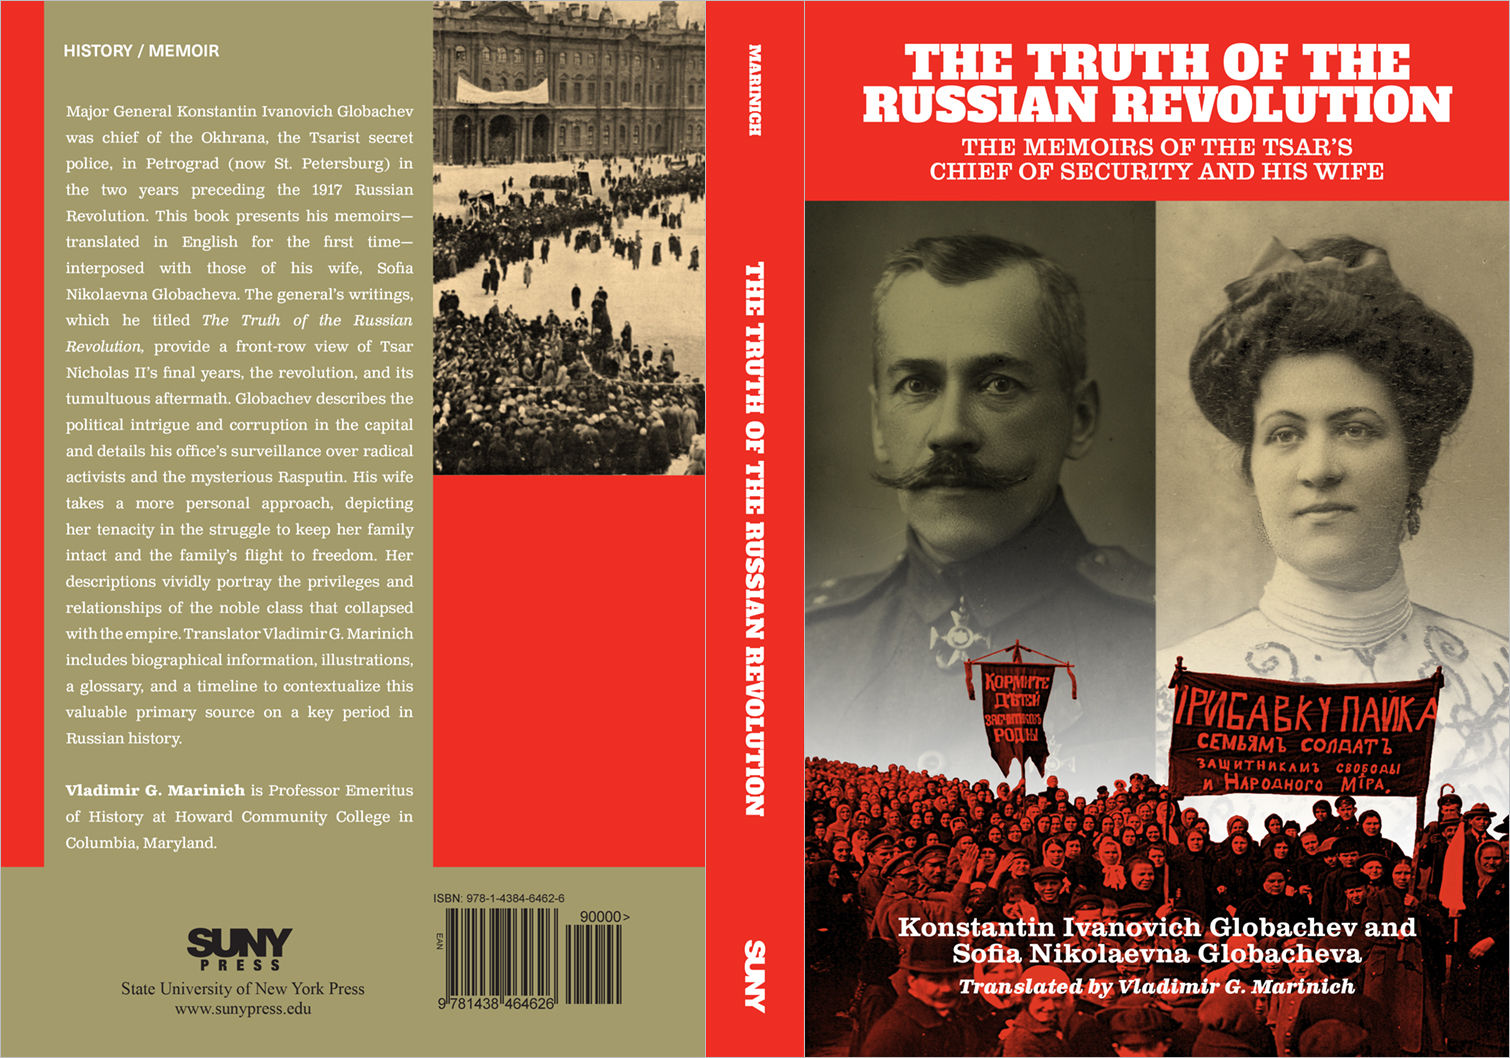 The Truth of the Russian Revolution